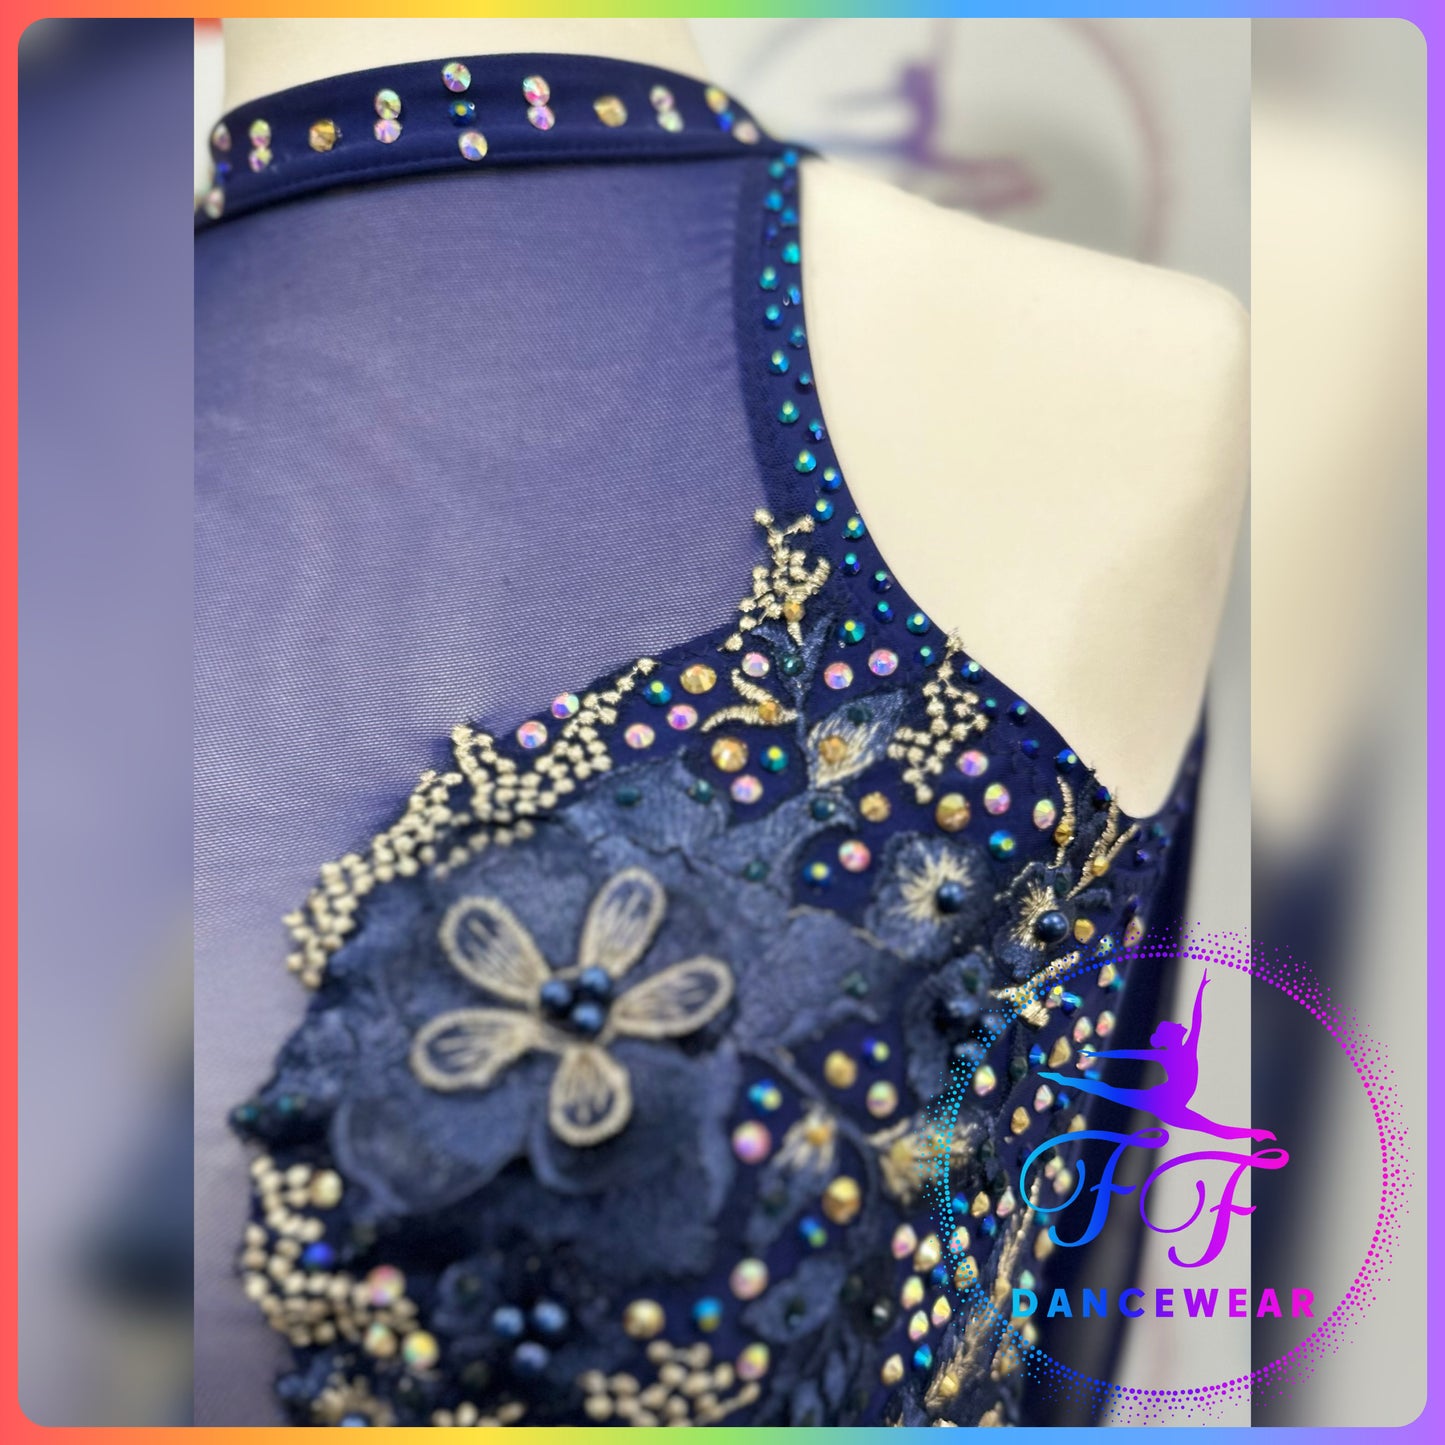 BESPOKE Navy Blue Stoned Lyrical / Contemporary Dance Costume (Adult Small)